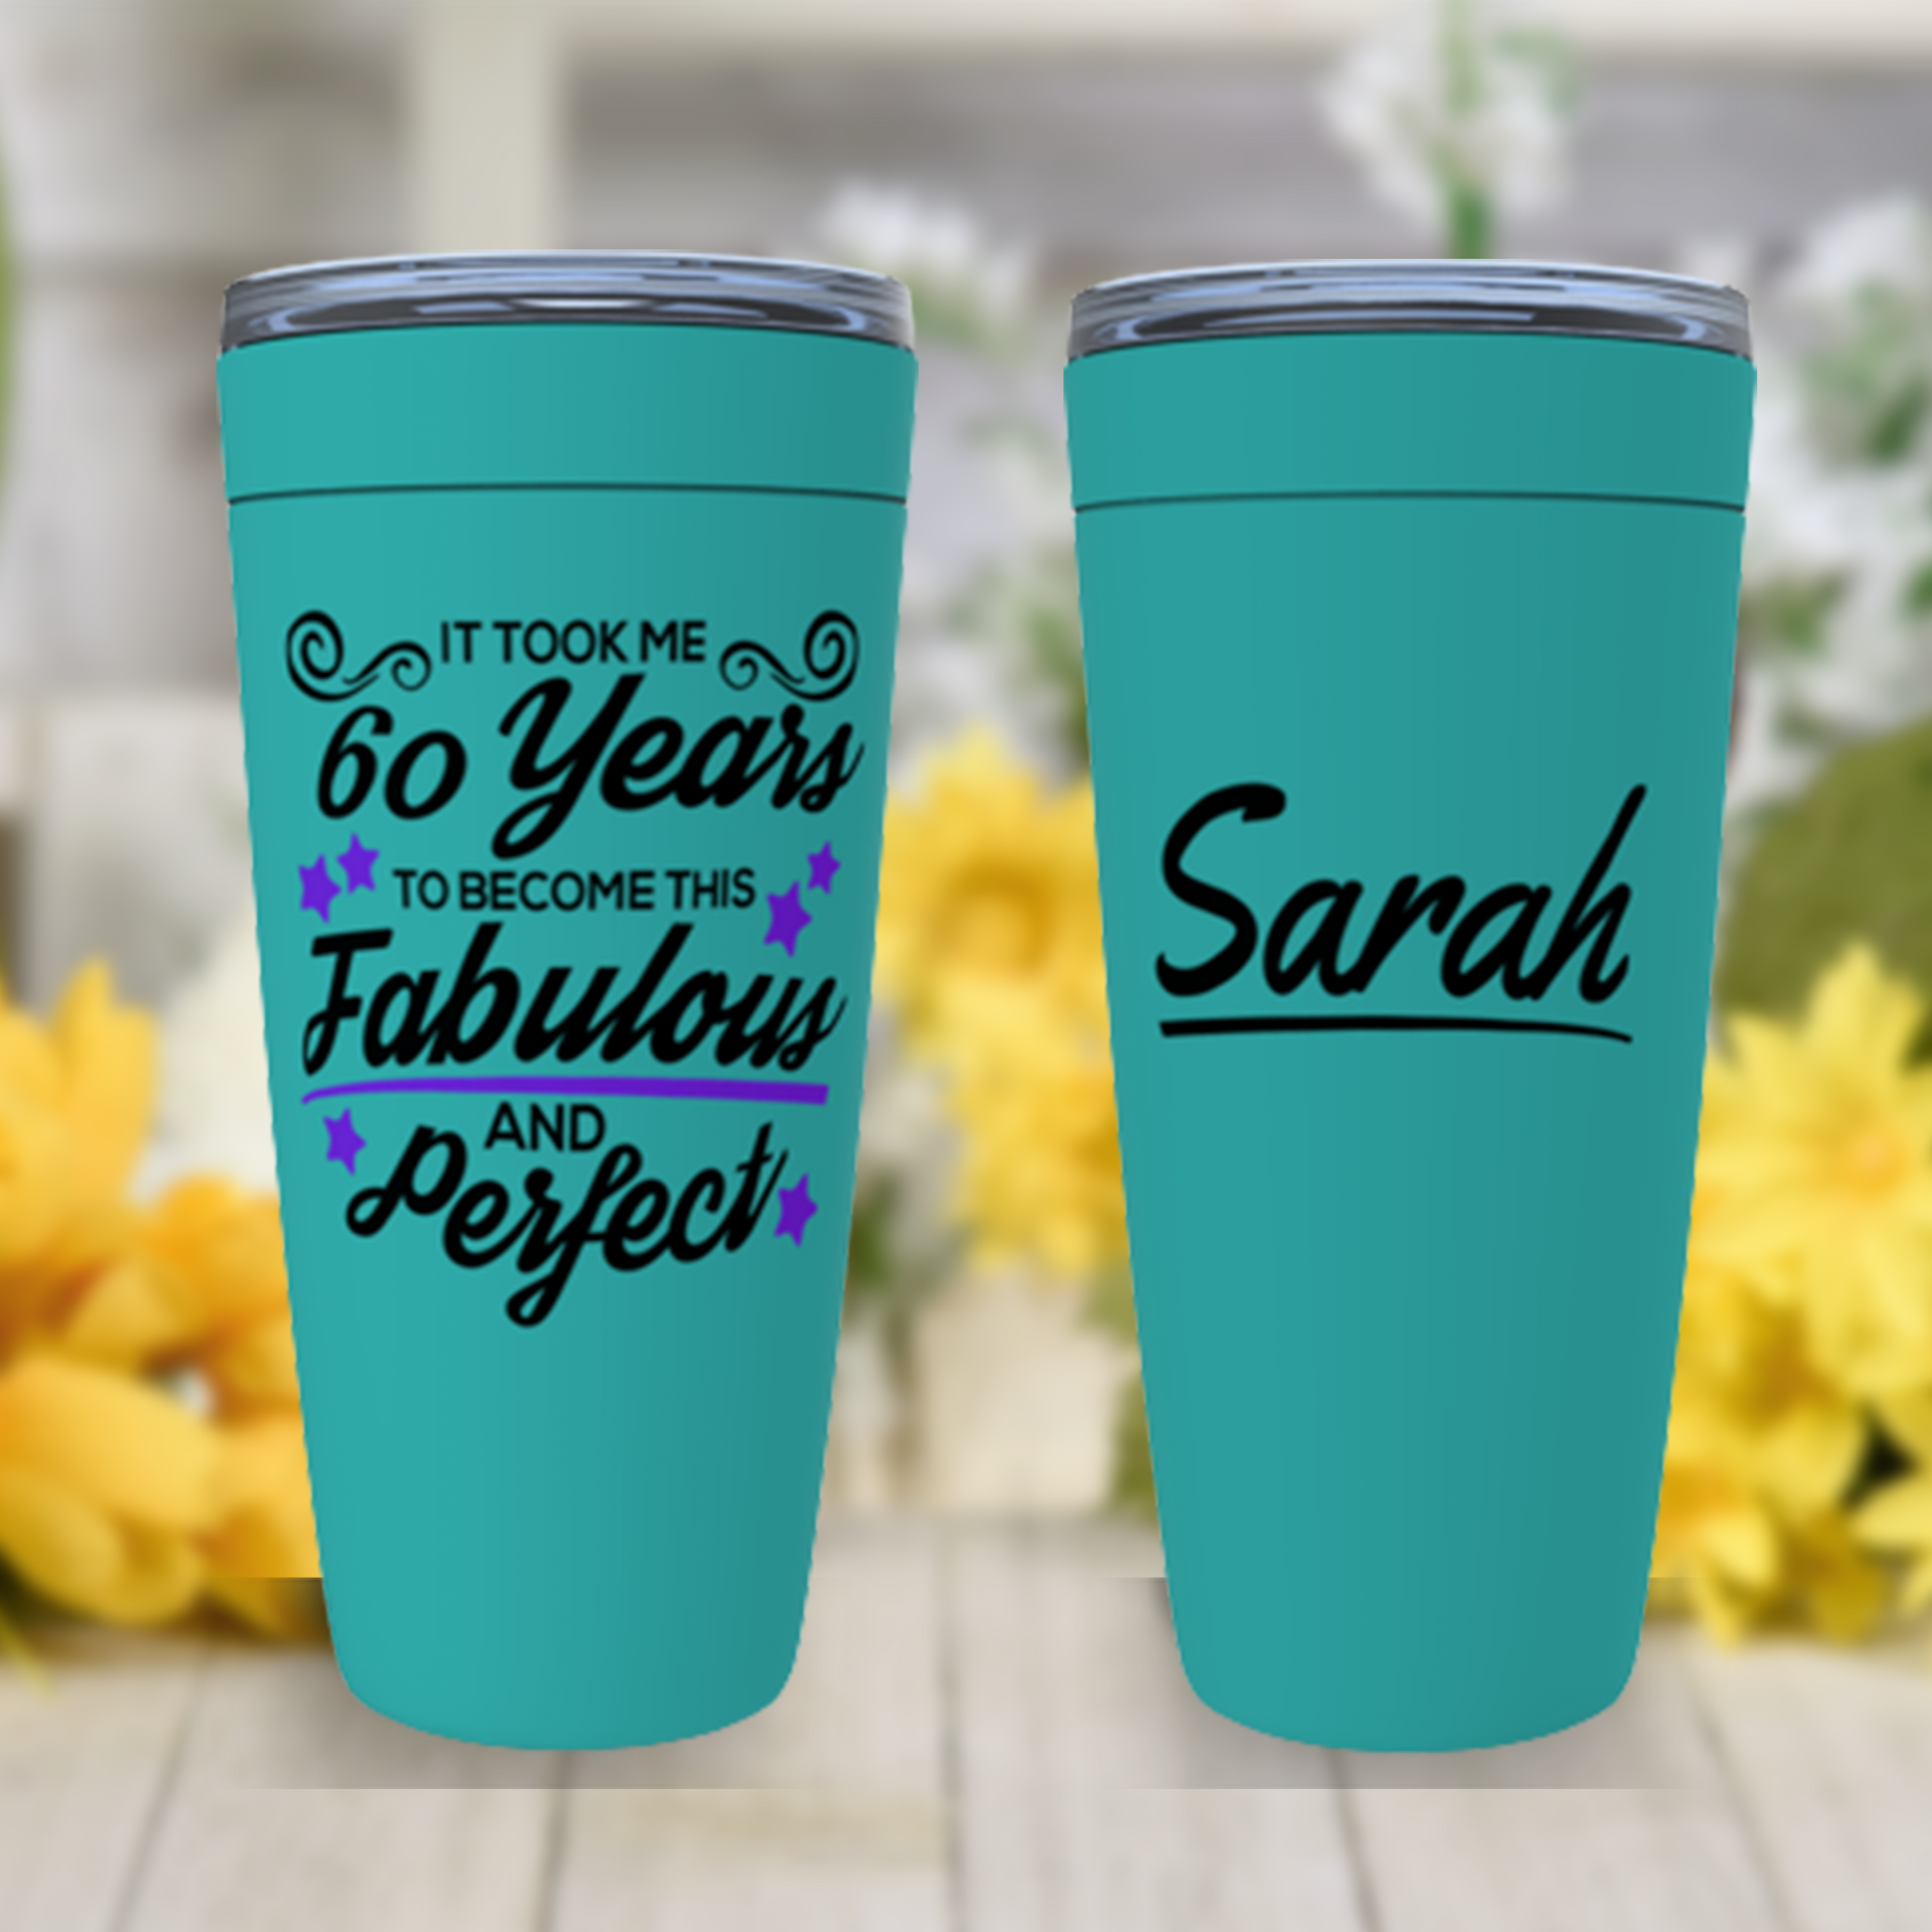 60th Birthday Gifts for Women Personalized, Gift for 60 Year Old Woman, 60 and Fabulous Tumbler, Funny Birthday Cup for Mom, Sister, Friend